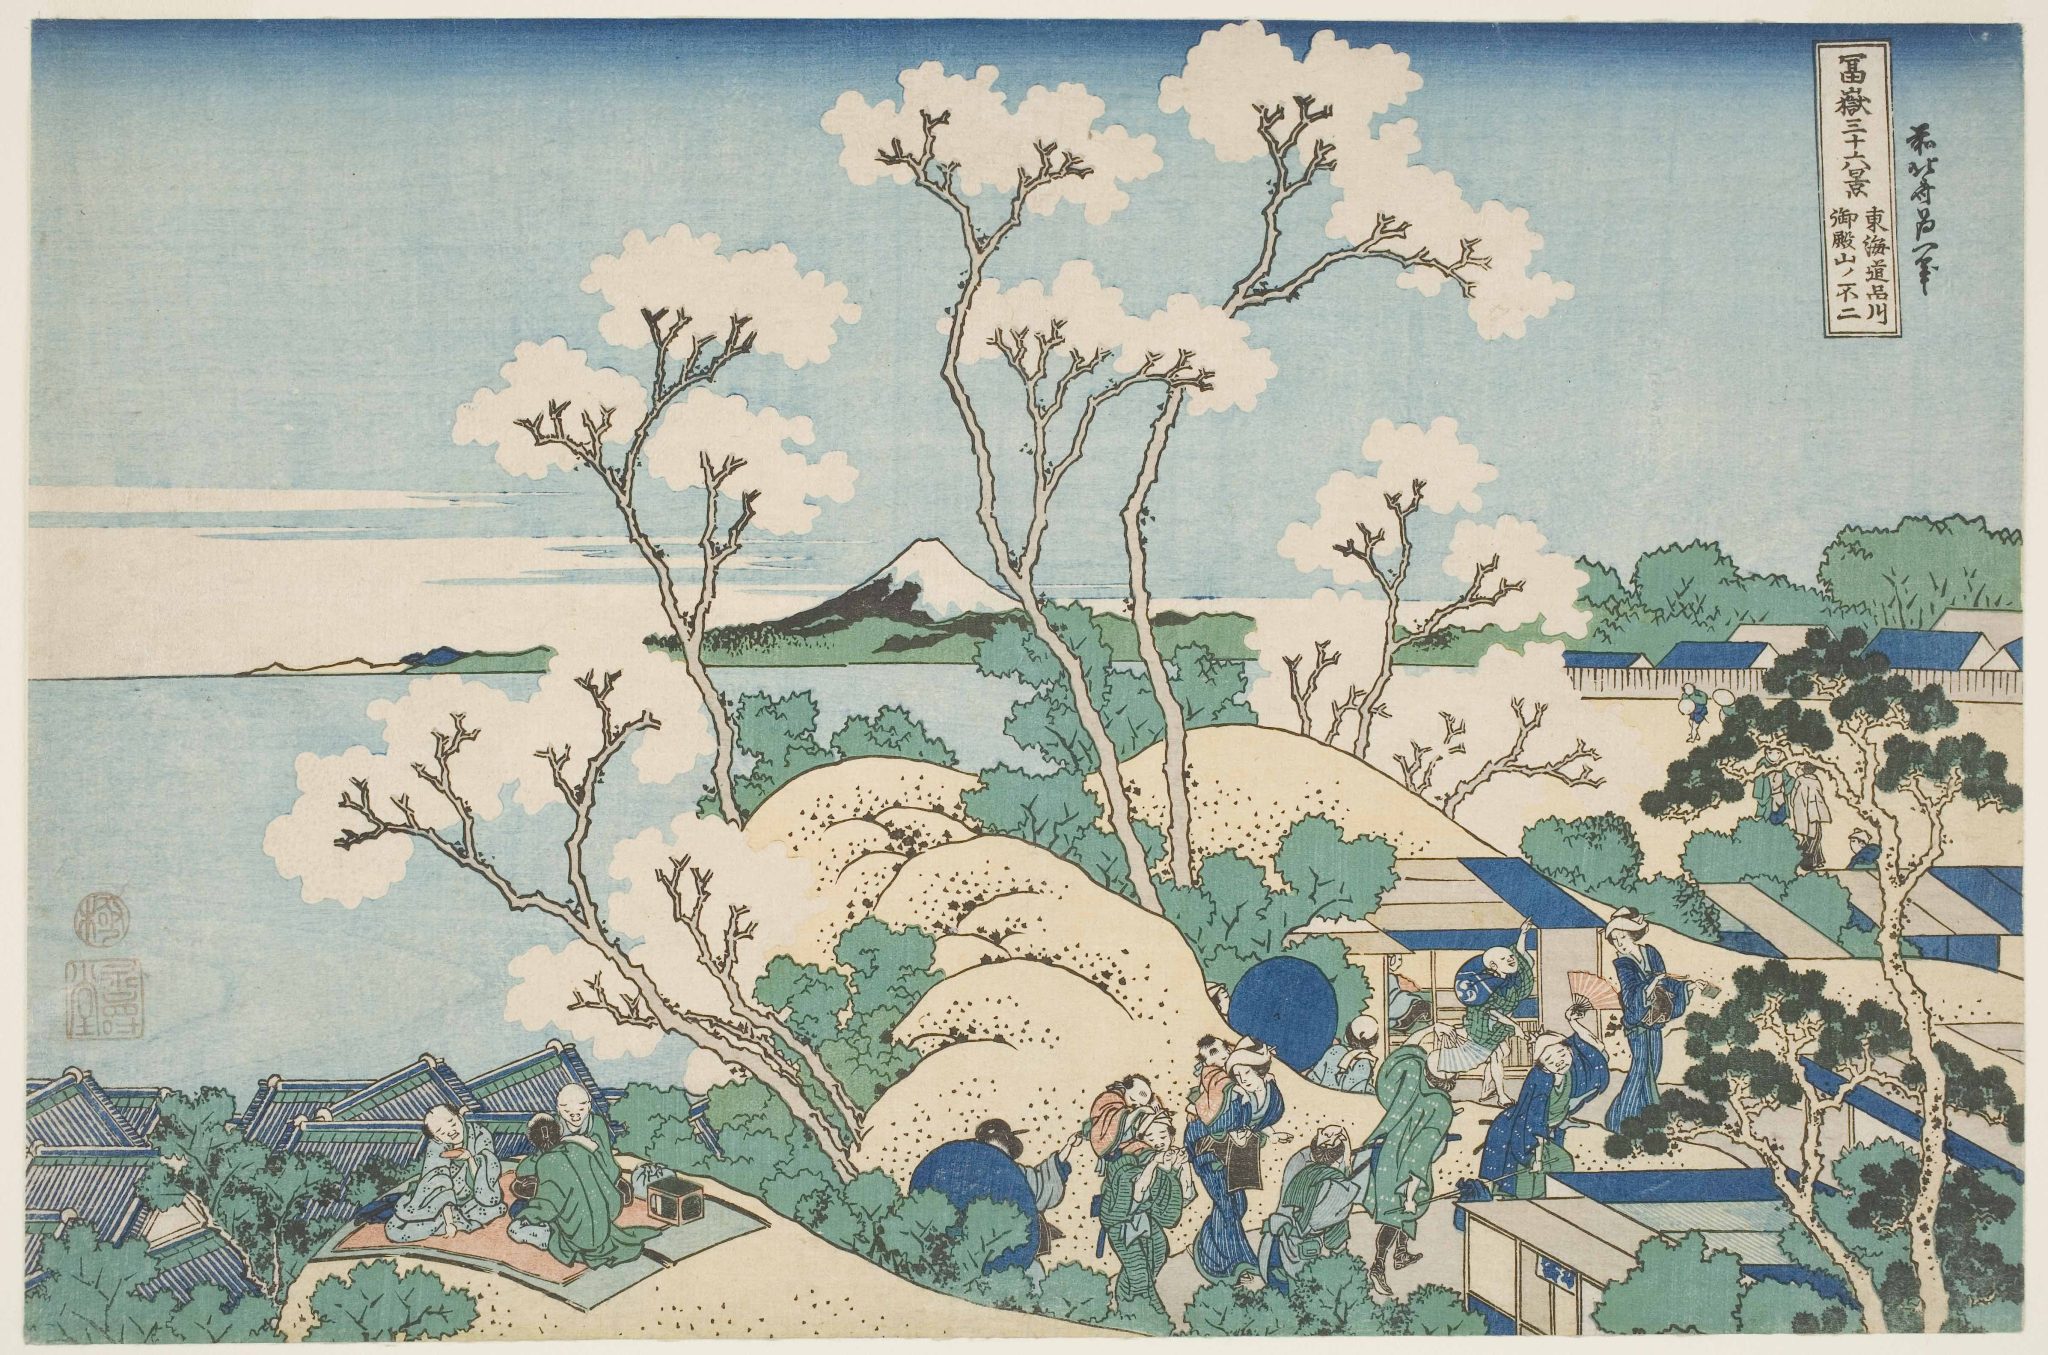 A Japanese woodblock print d depicting various people on a landscape and under a large tree with a view of Mount Fuji in the backgroun